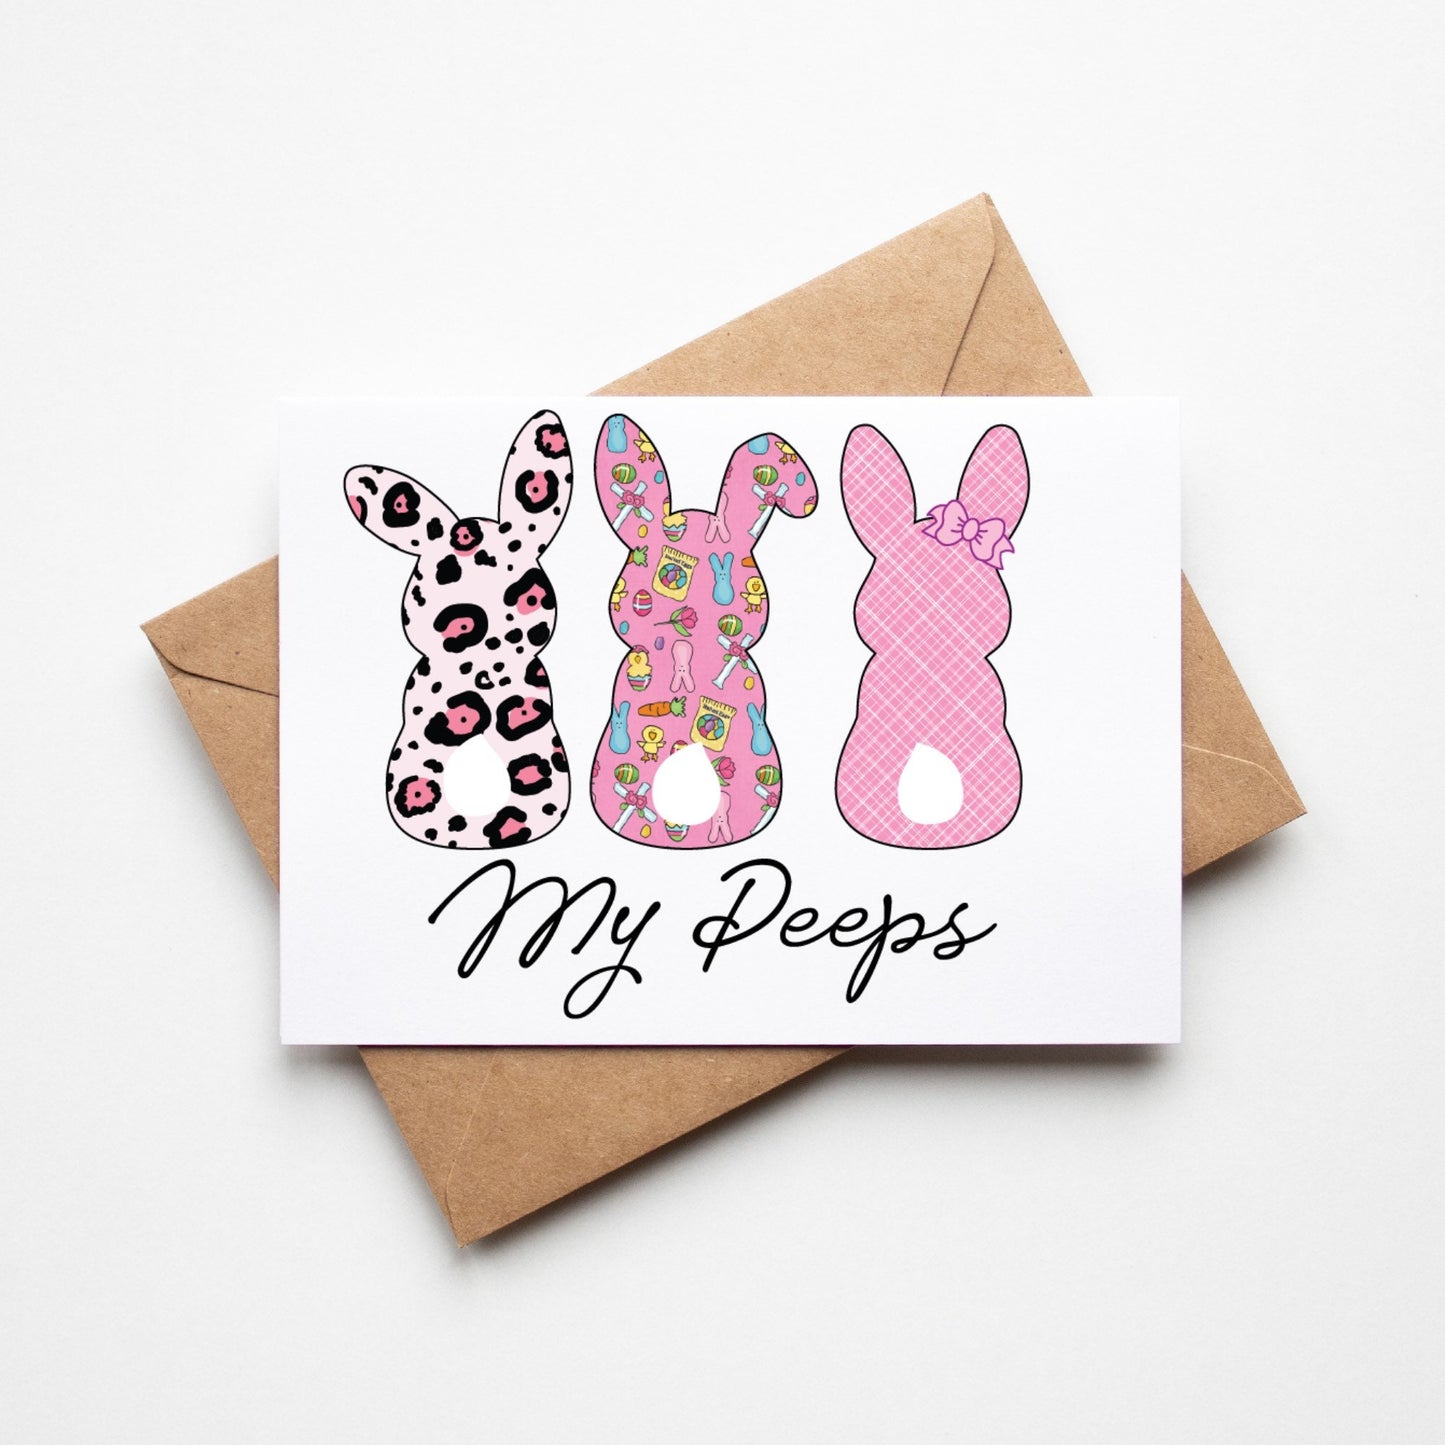 SUBLIMATION ready to press transfer- My peeps Easter bunny transfer design